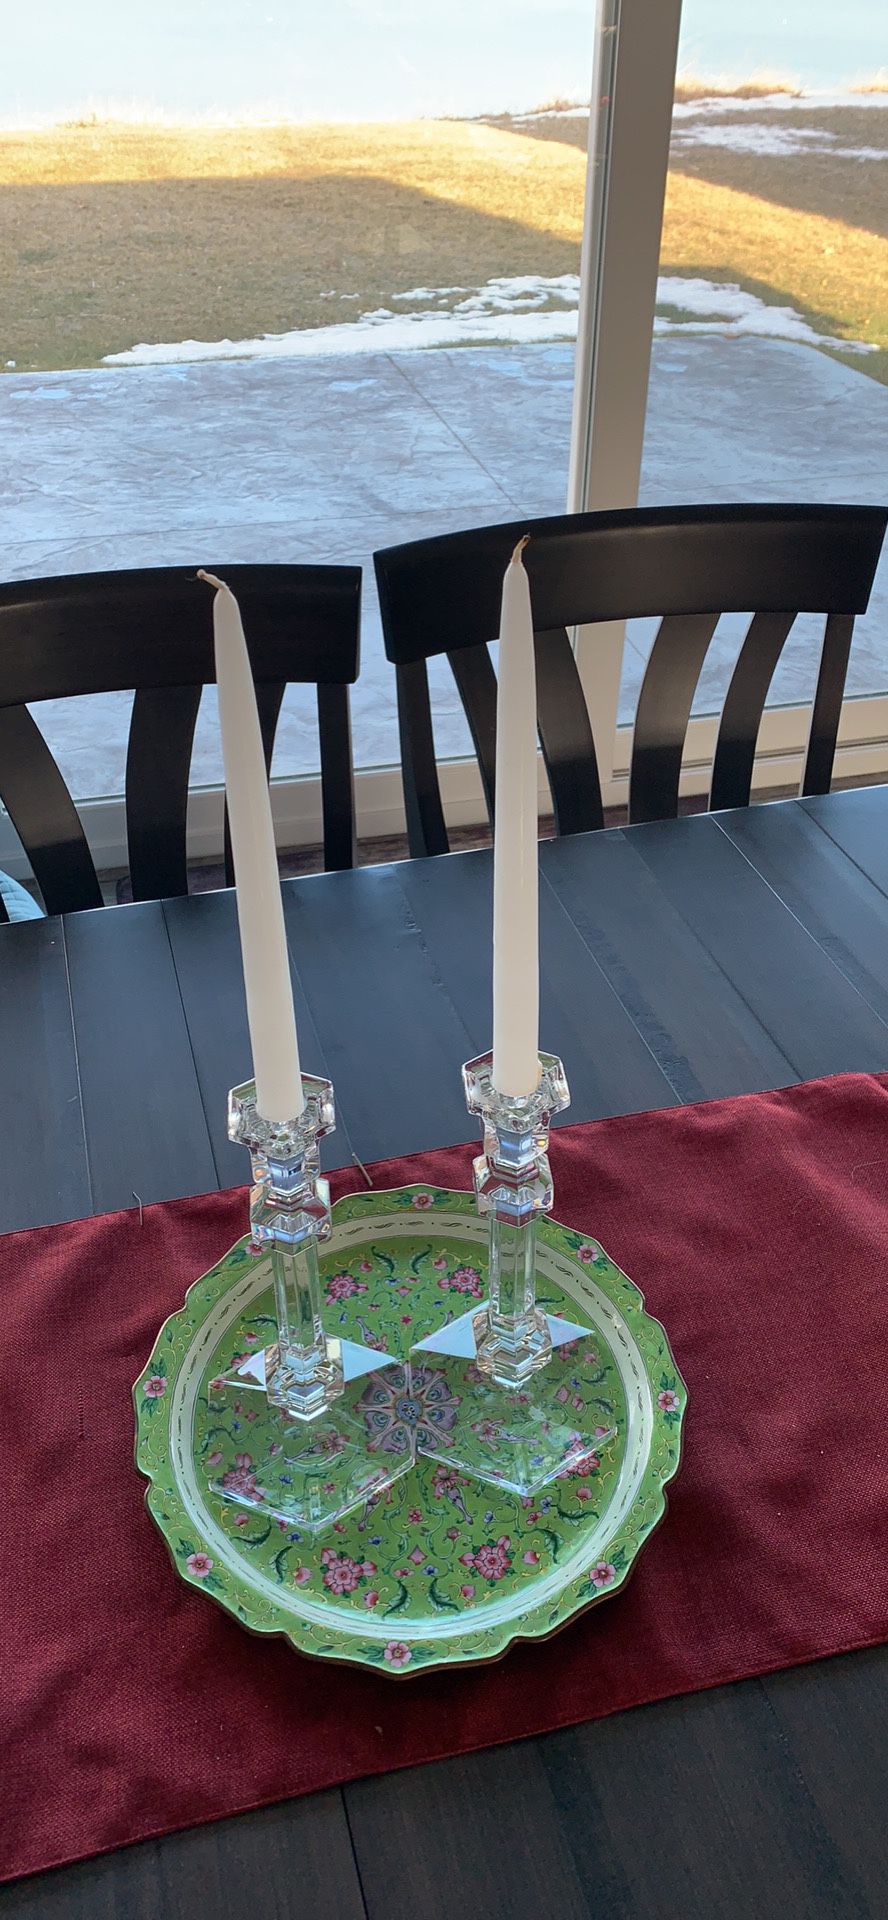 Crystal Candlesticks and plate